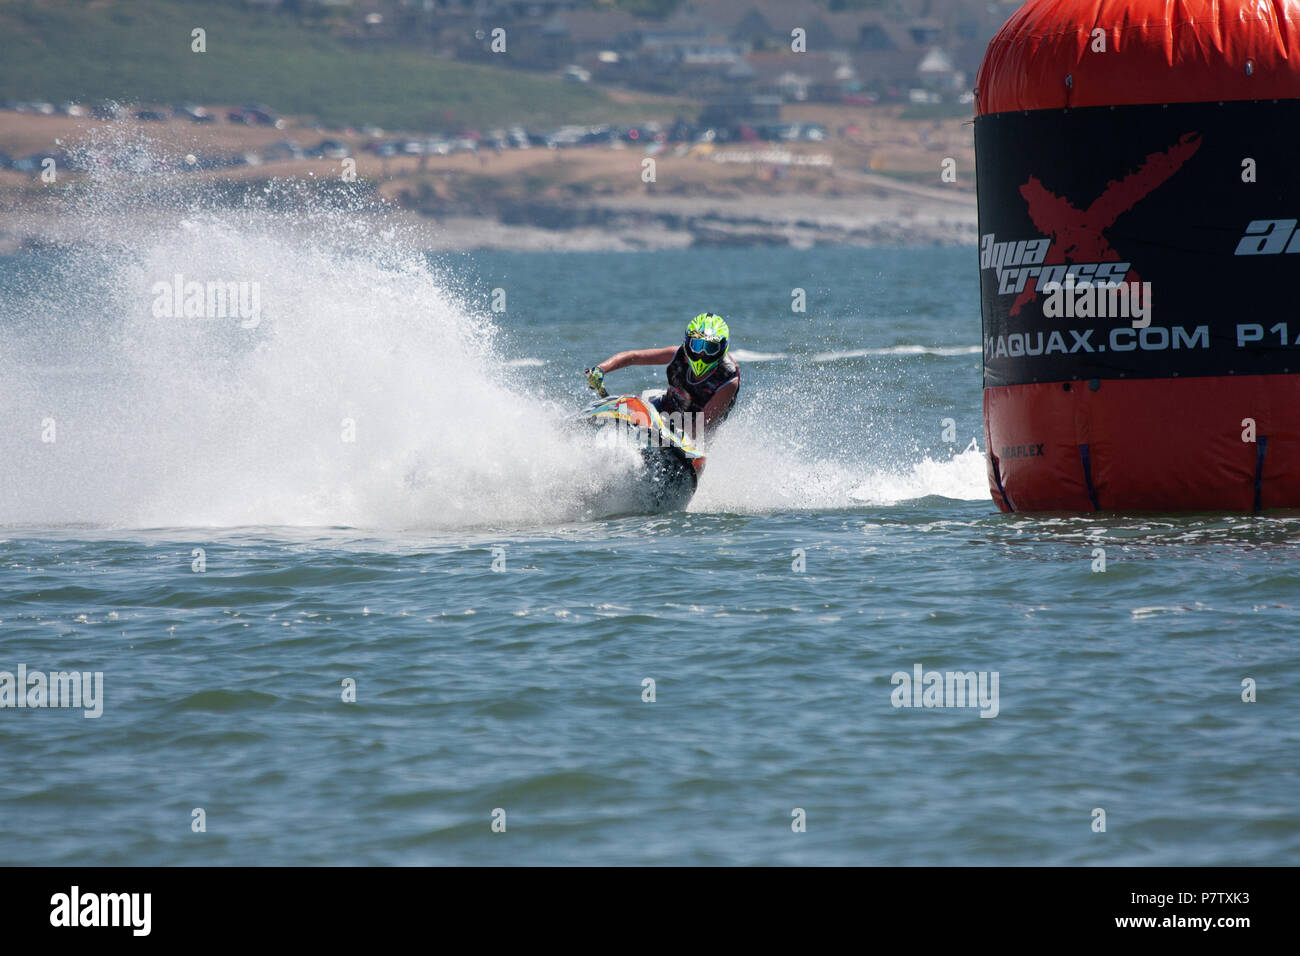 Newton Beach, Porthcawl, Wales, 07 July,2018. Jet Ski raceing at the National race series of high speed, adrenaline-packed P1 Aqua Cross during a glorious summers day. Credit Andrew William Megicks/Alamy Live News Stock Photo